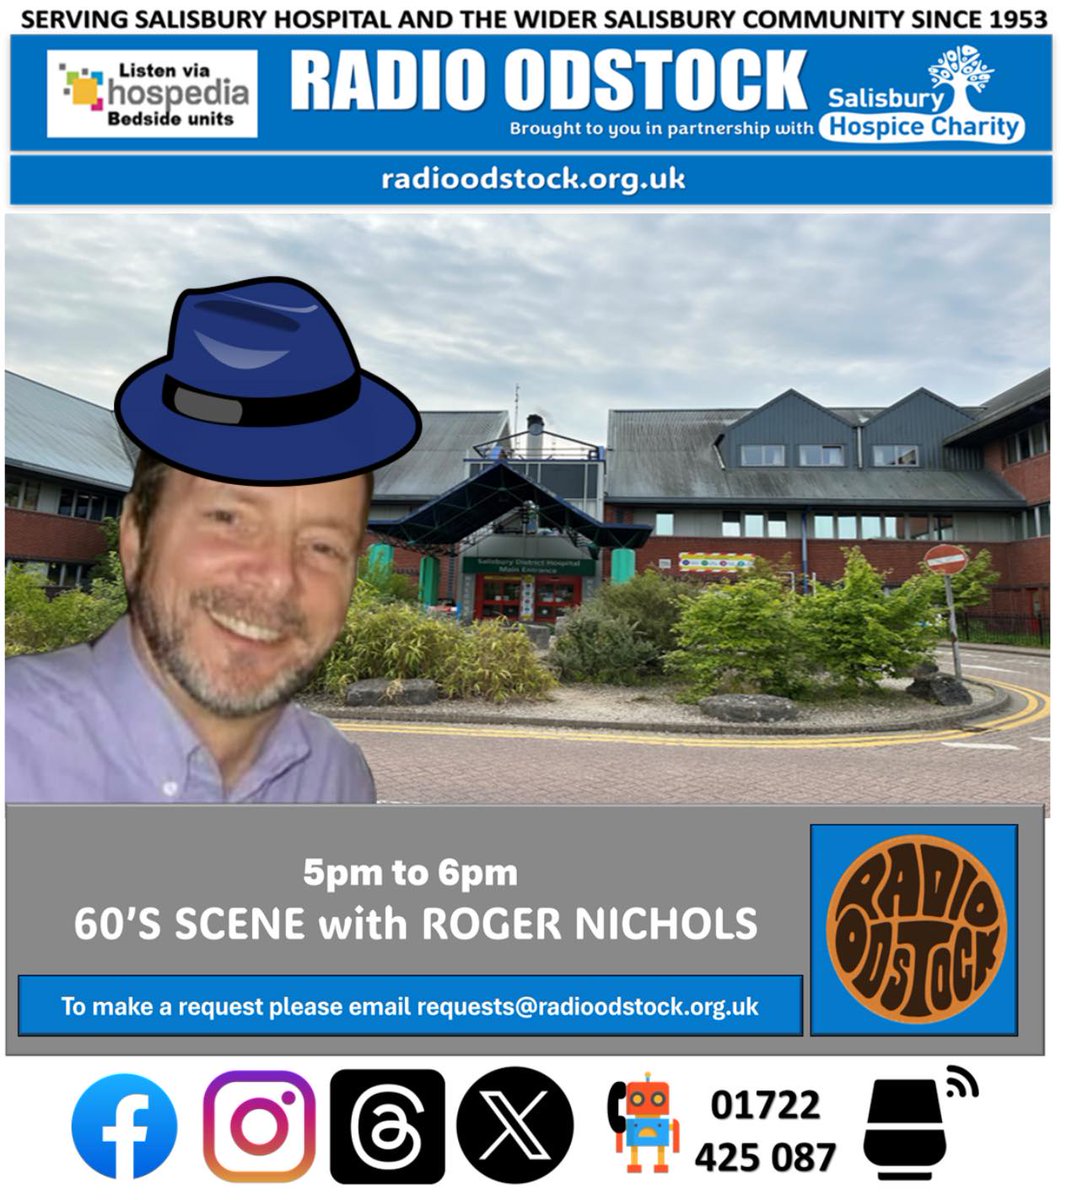 I am reading the recently issued book by Christopher Sandford “1964 The Year the Swinging Sixties Began” which has inspired this week’s 60s Scene as there was so much great music released that year .  
Listen at radioodstock.org.uk
#salisbury #60smusic